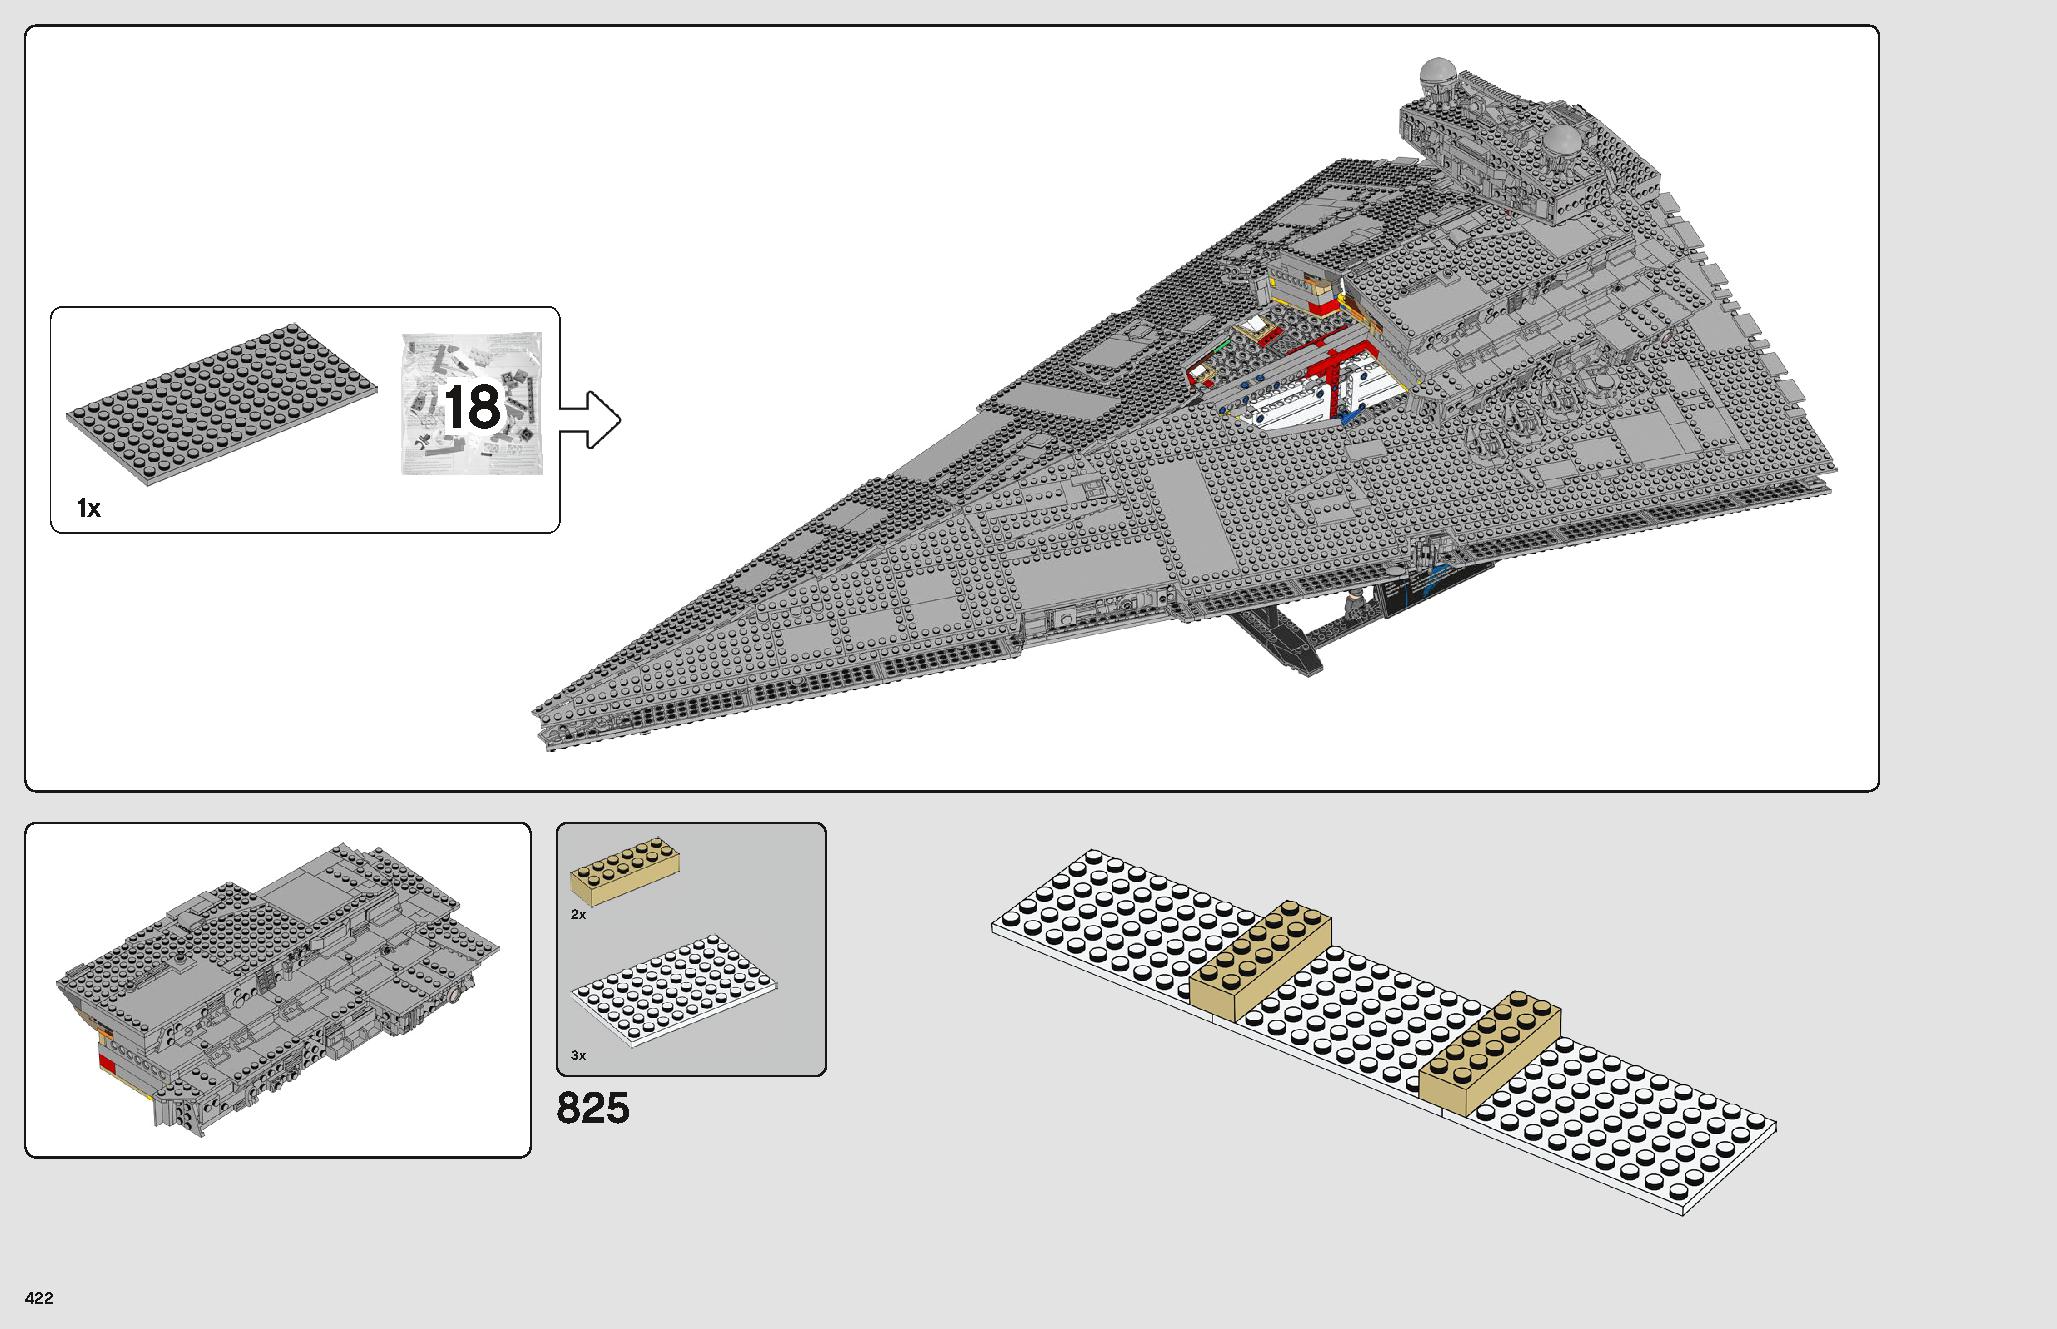 Imperial Star Destroyer 75252 レゴの商品情報 レゴの説明書・組立方法 422 page